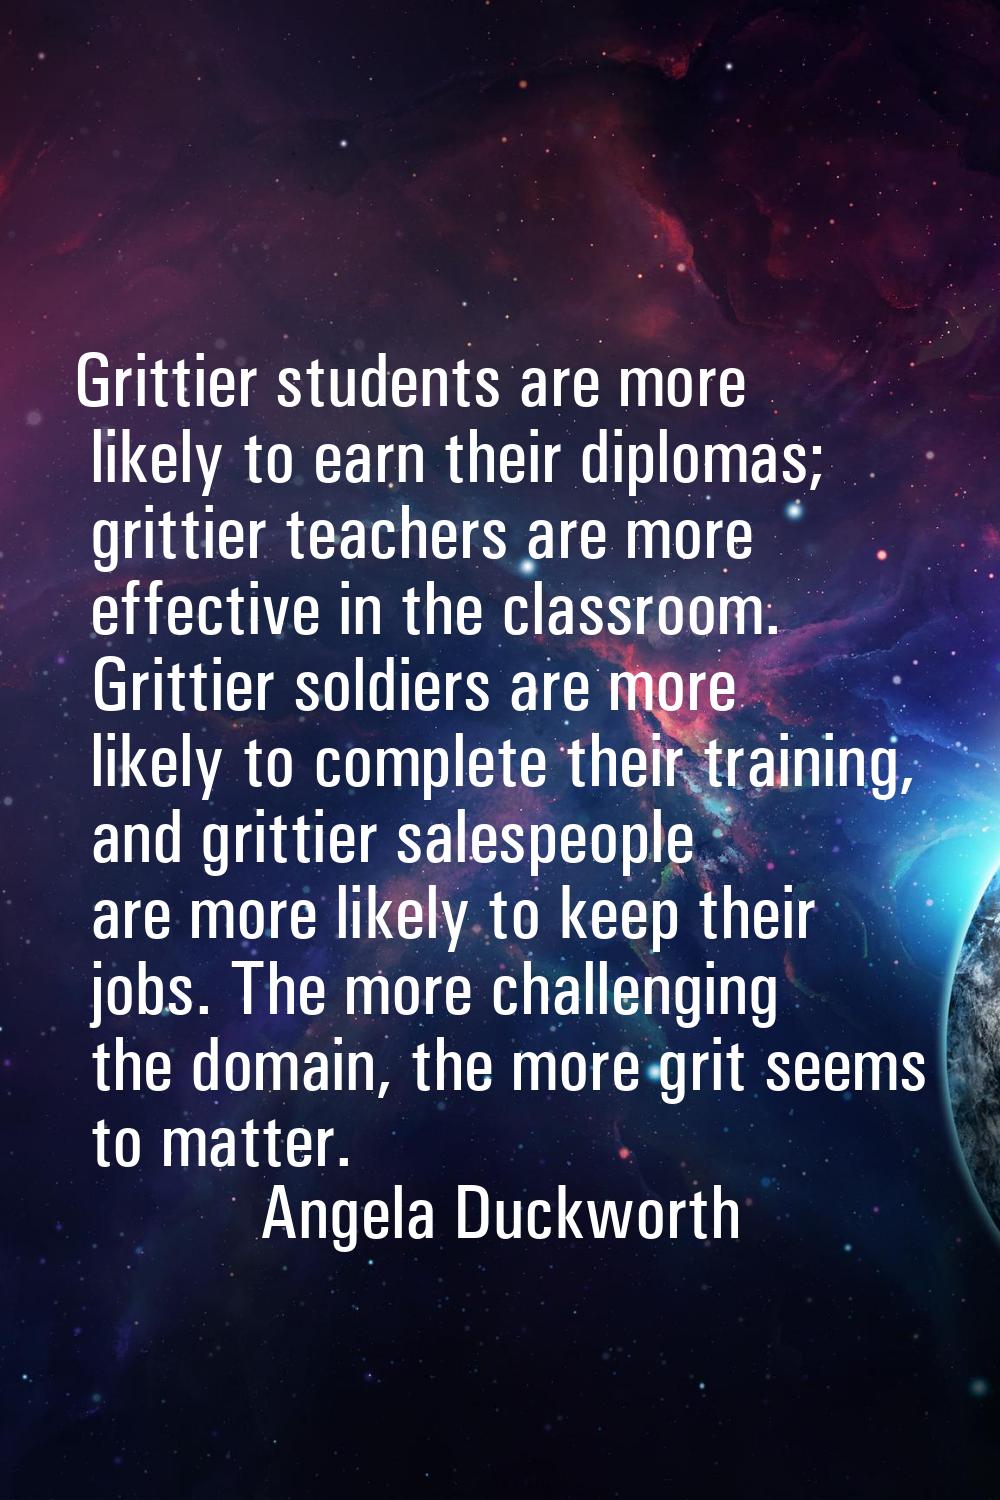 Grittier students are more likely to earn their diplomas; grittier teachers are more effective in t